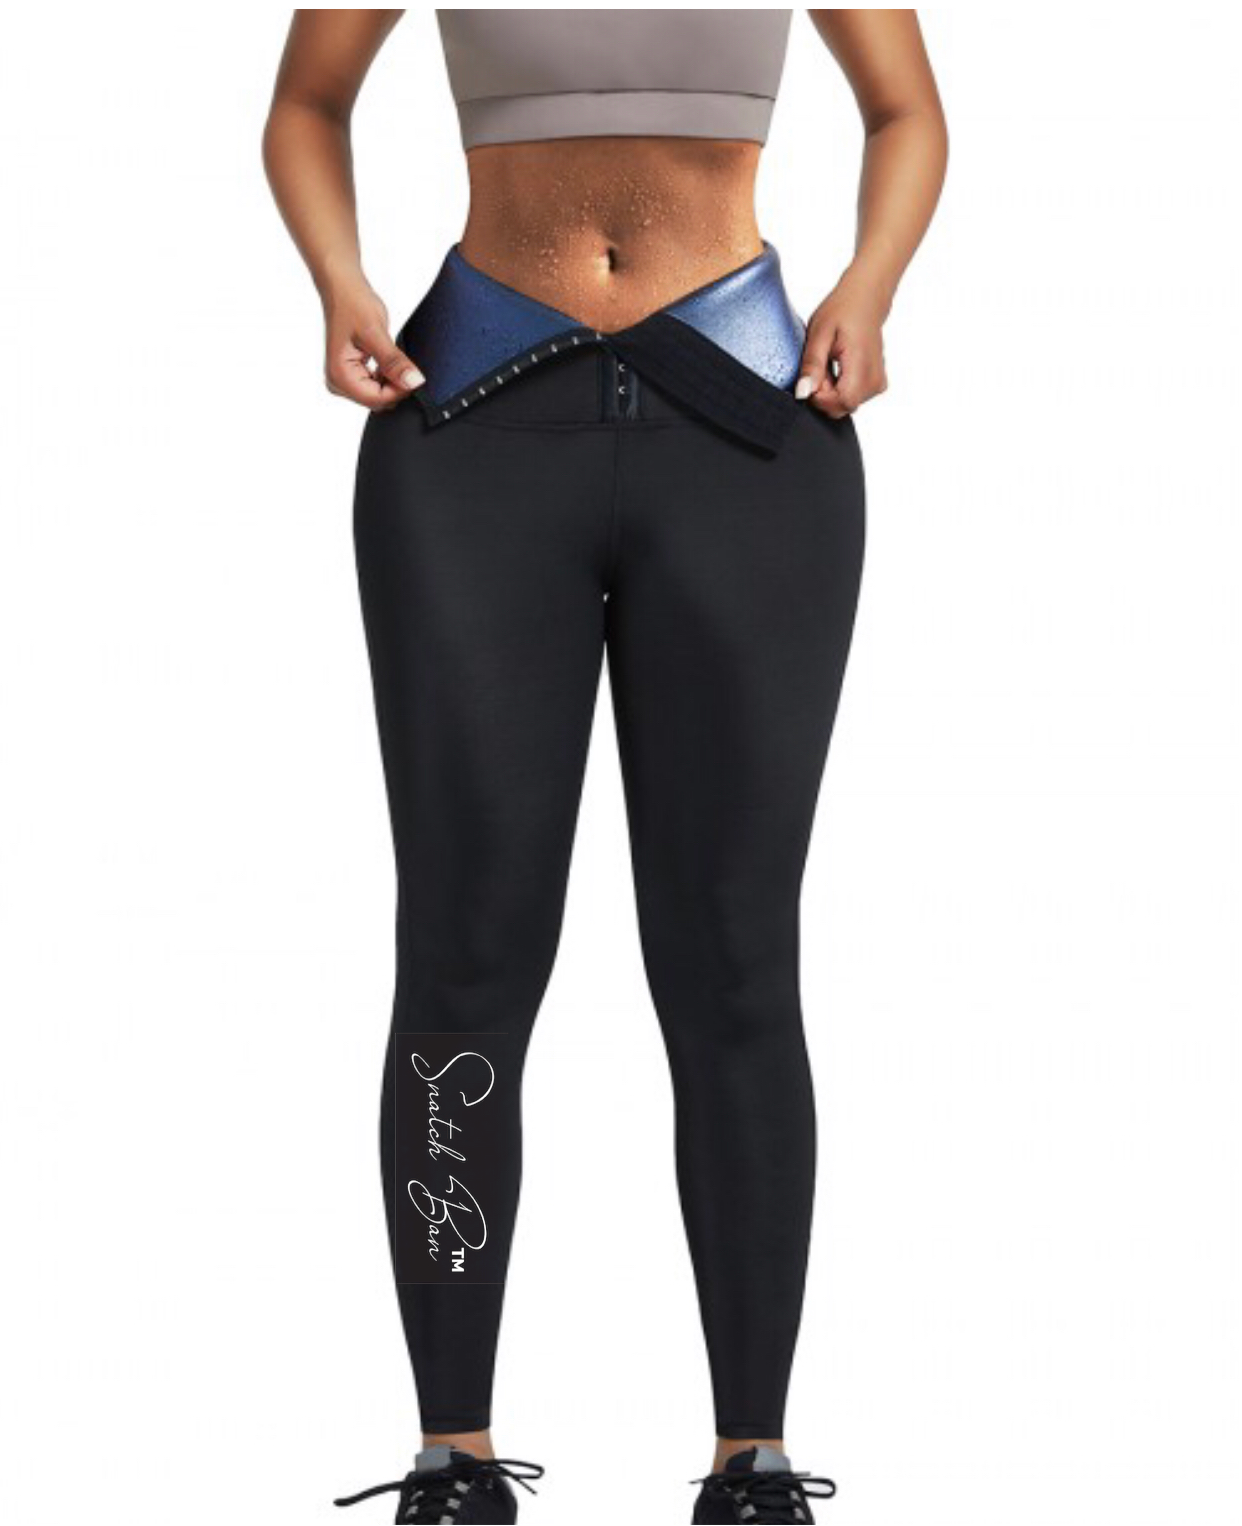 How The Right Legging Can Help You Get The Snatched Waist, by Adrisolusa